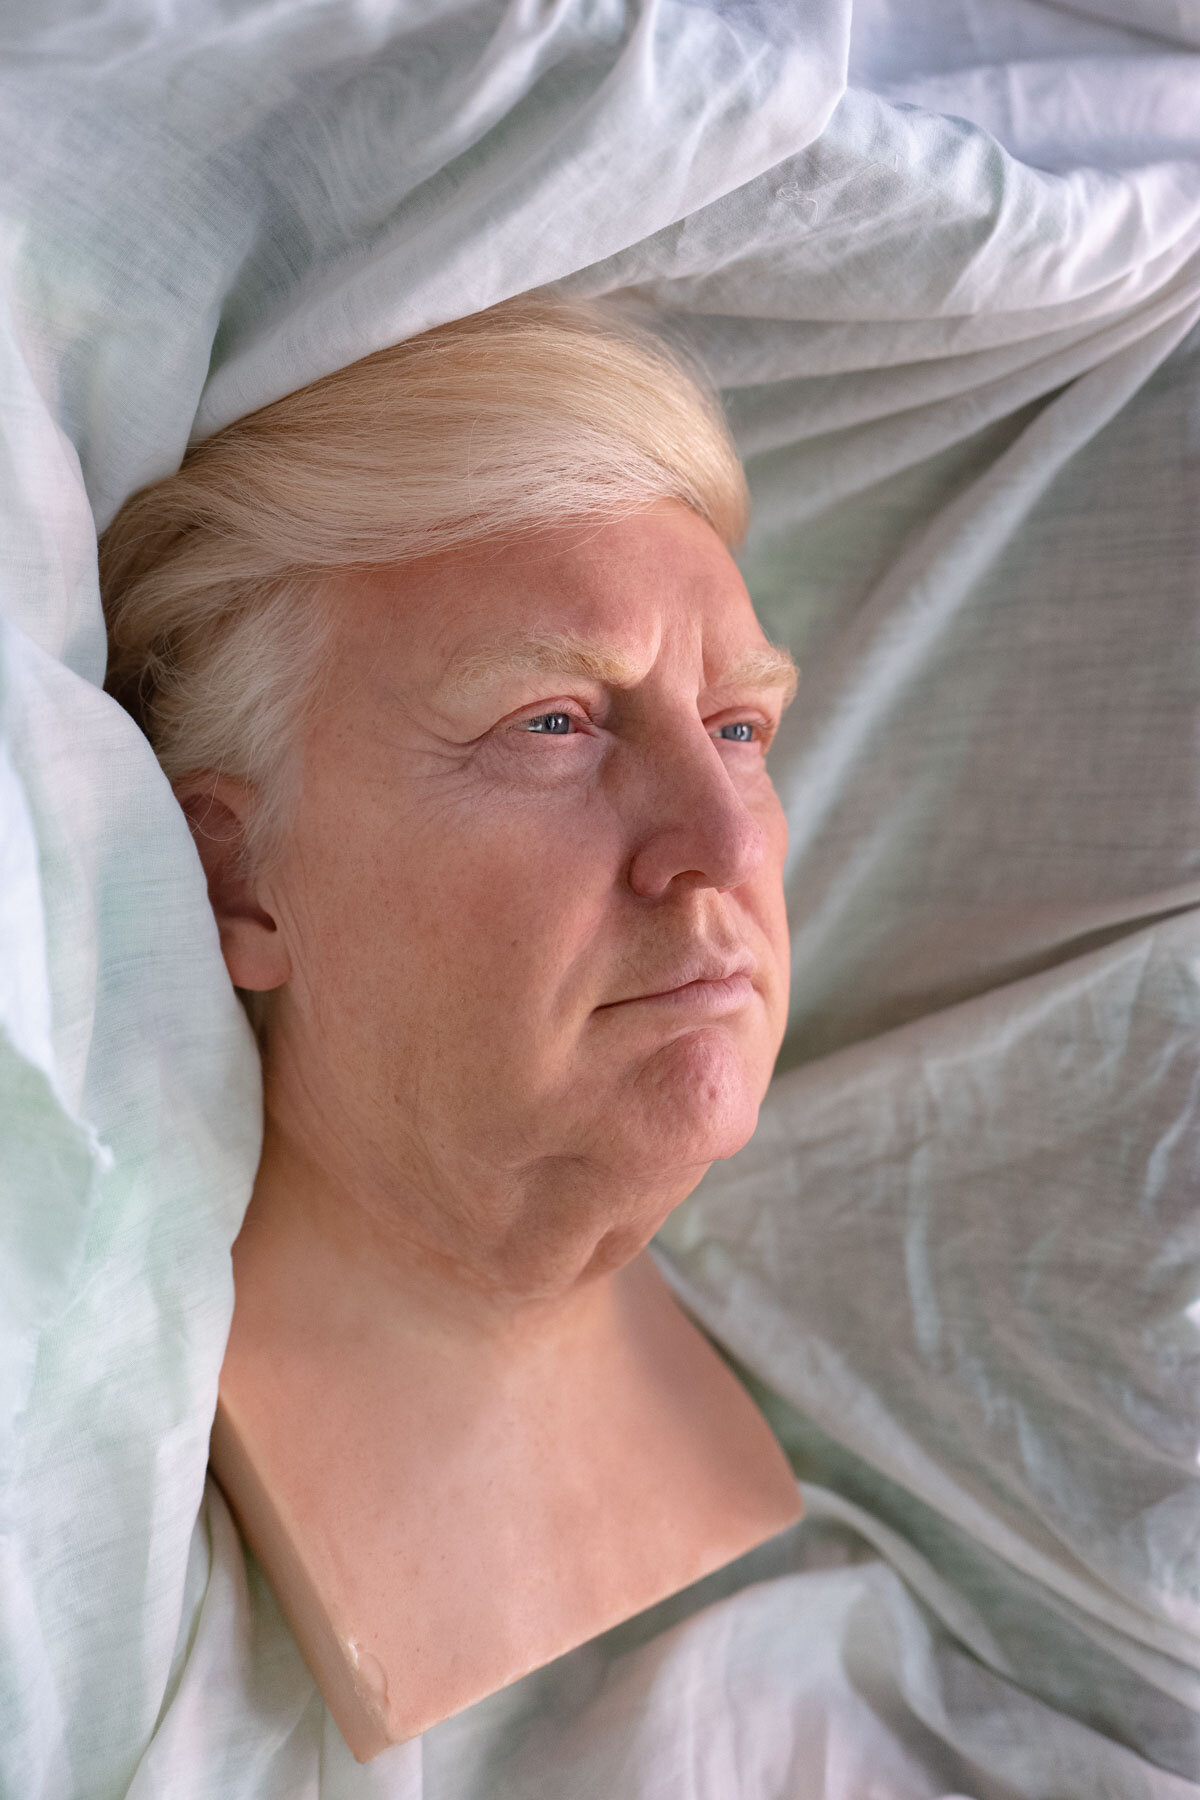  January 12th 2021 - Former President Trump Wax head is getting stored in a box for the winter in the Presidential Was Museum of Keystone, South Dakota. 